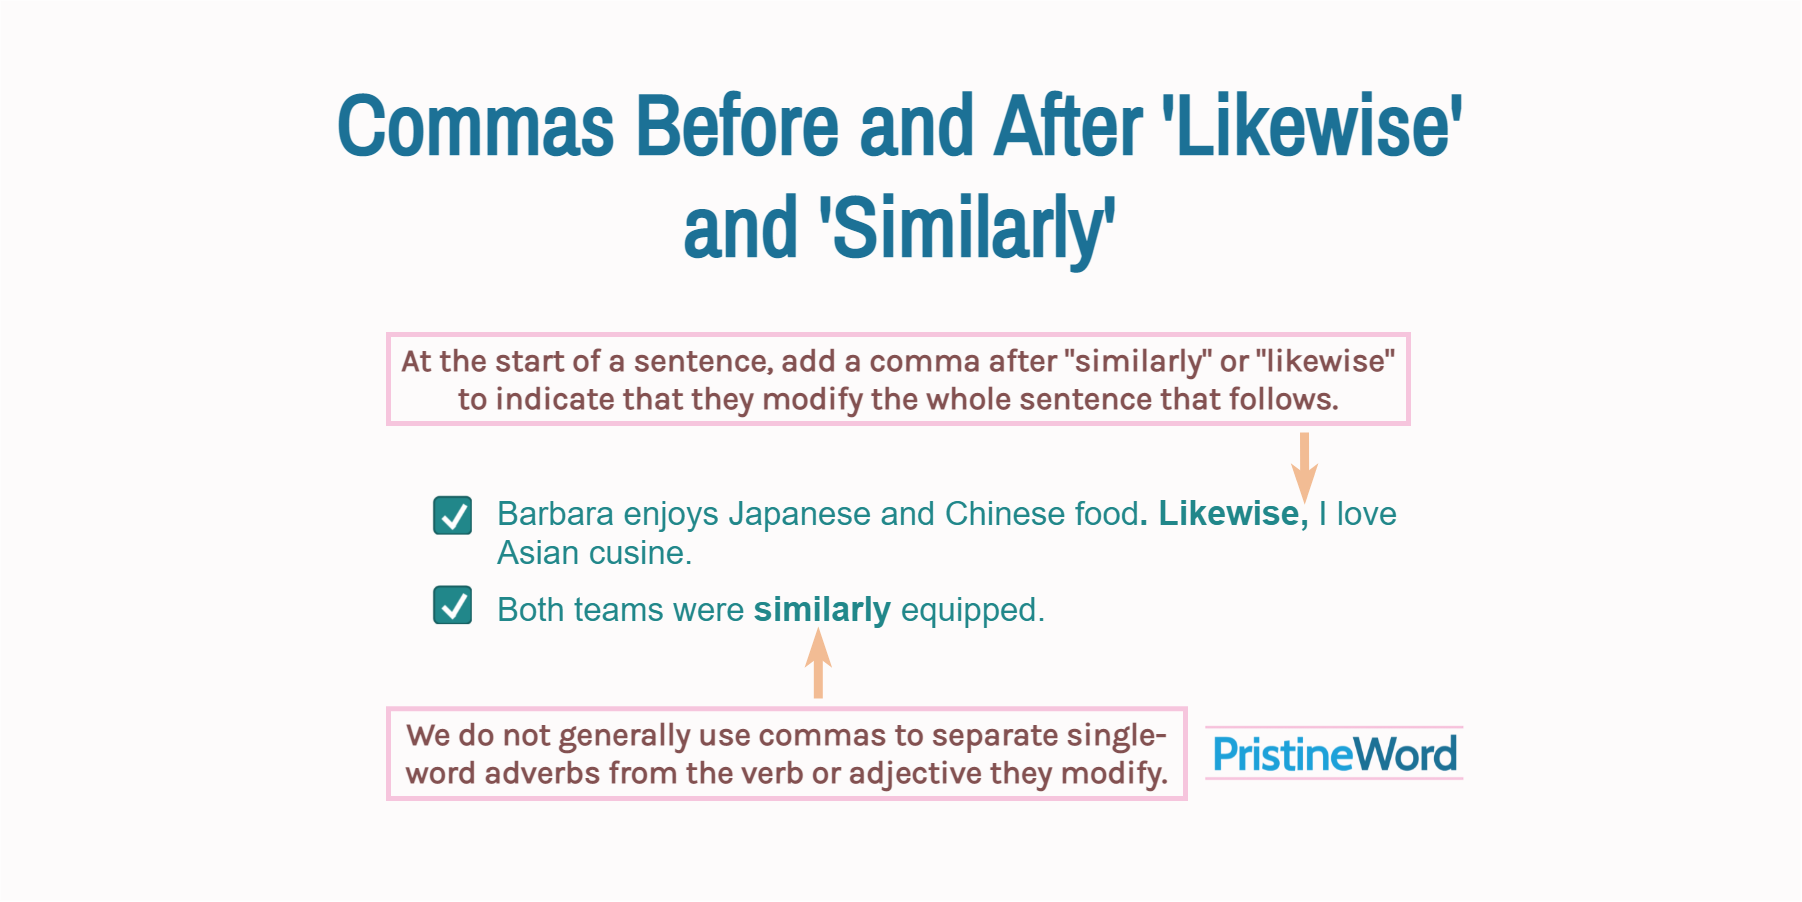 Commas Before and After 'Likewise' and 'Similarly'